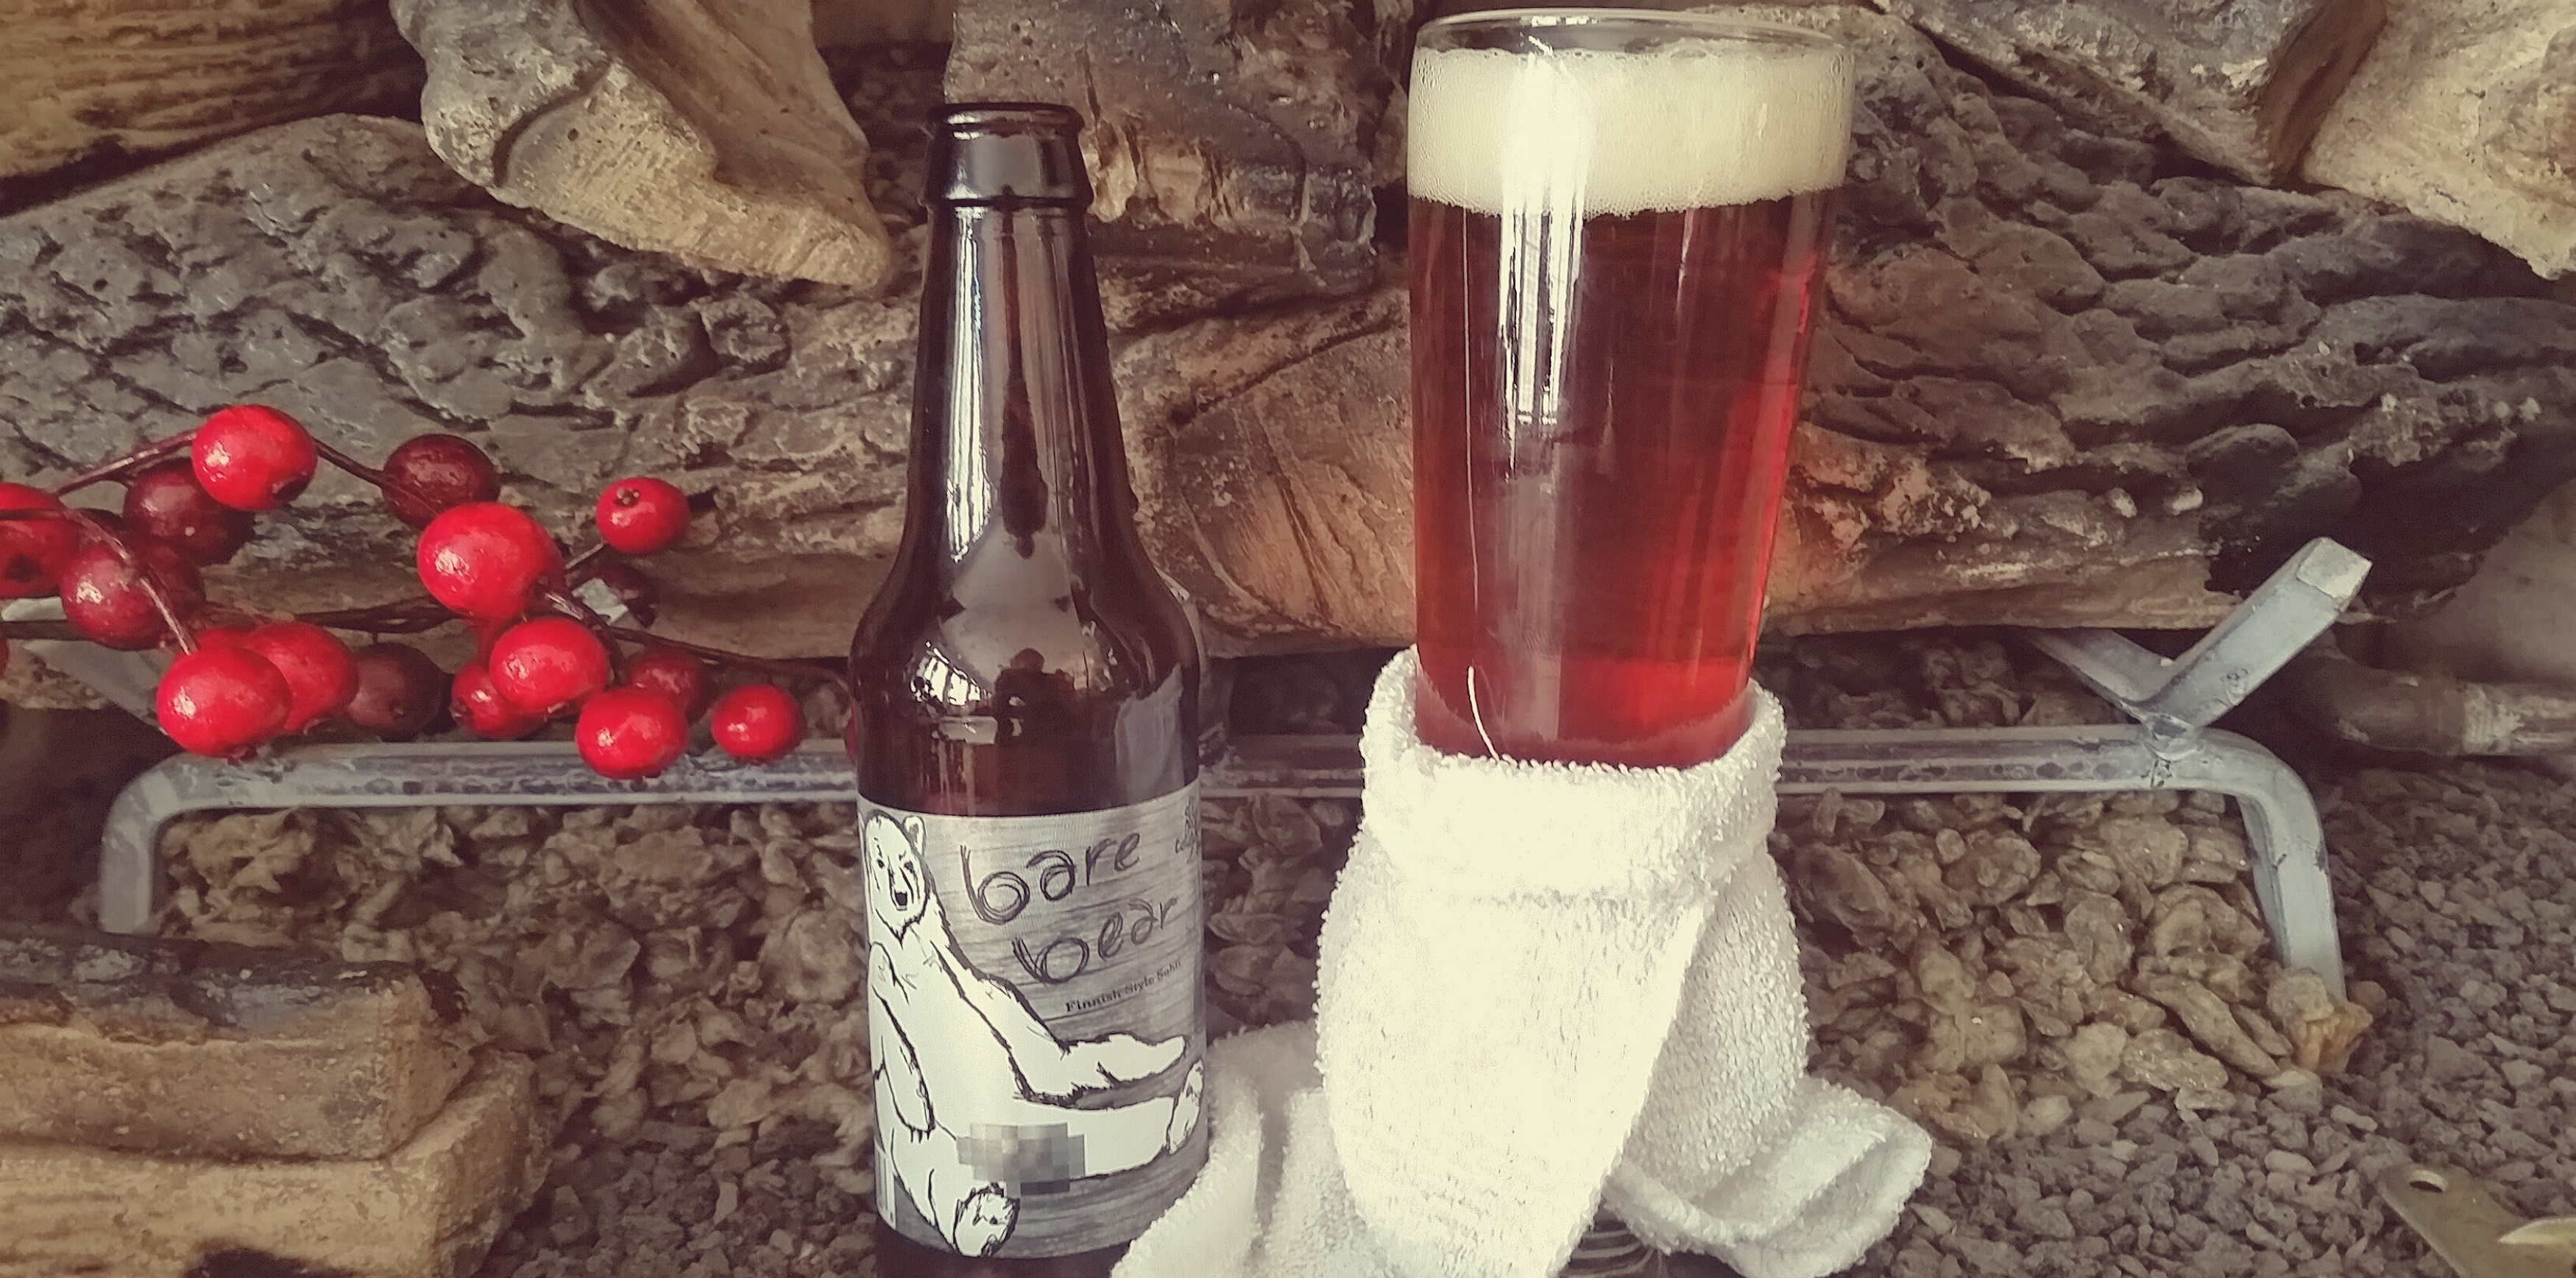 Off Color Brewing | Bare Bear